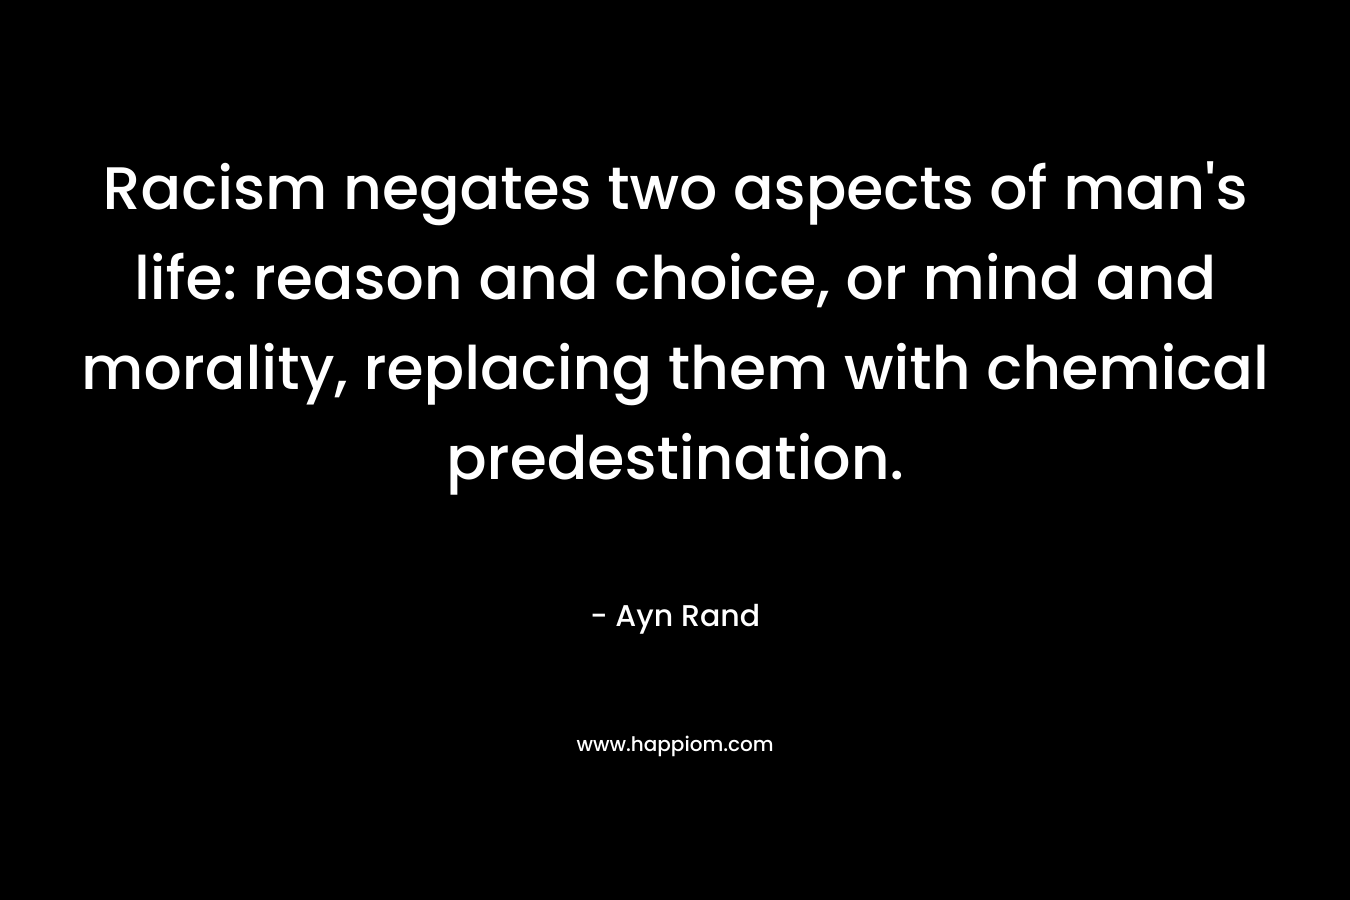 Racism negates two aspects of man's life: reason and choice, or mind and morality, replacing them with chemical predestination.